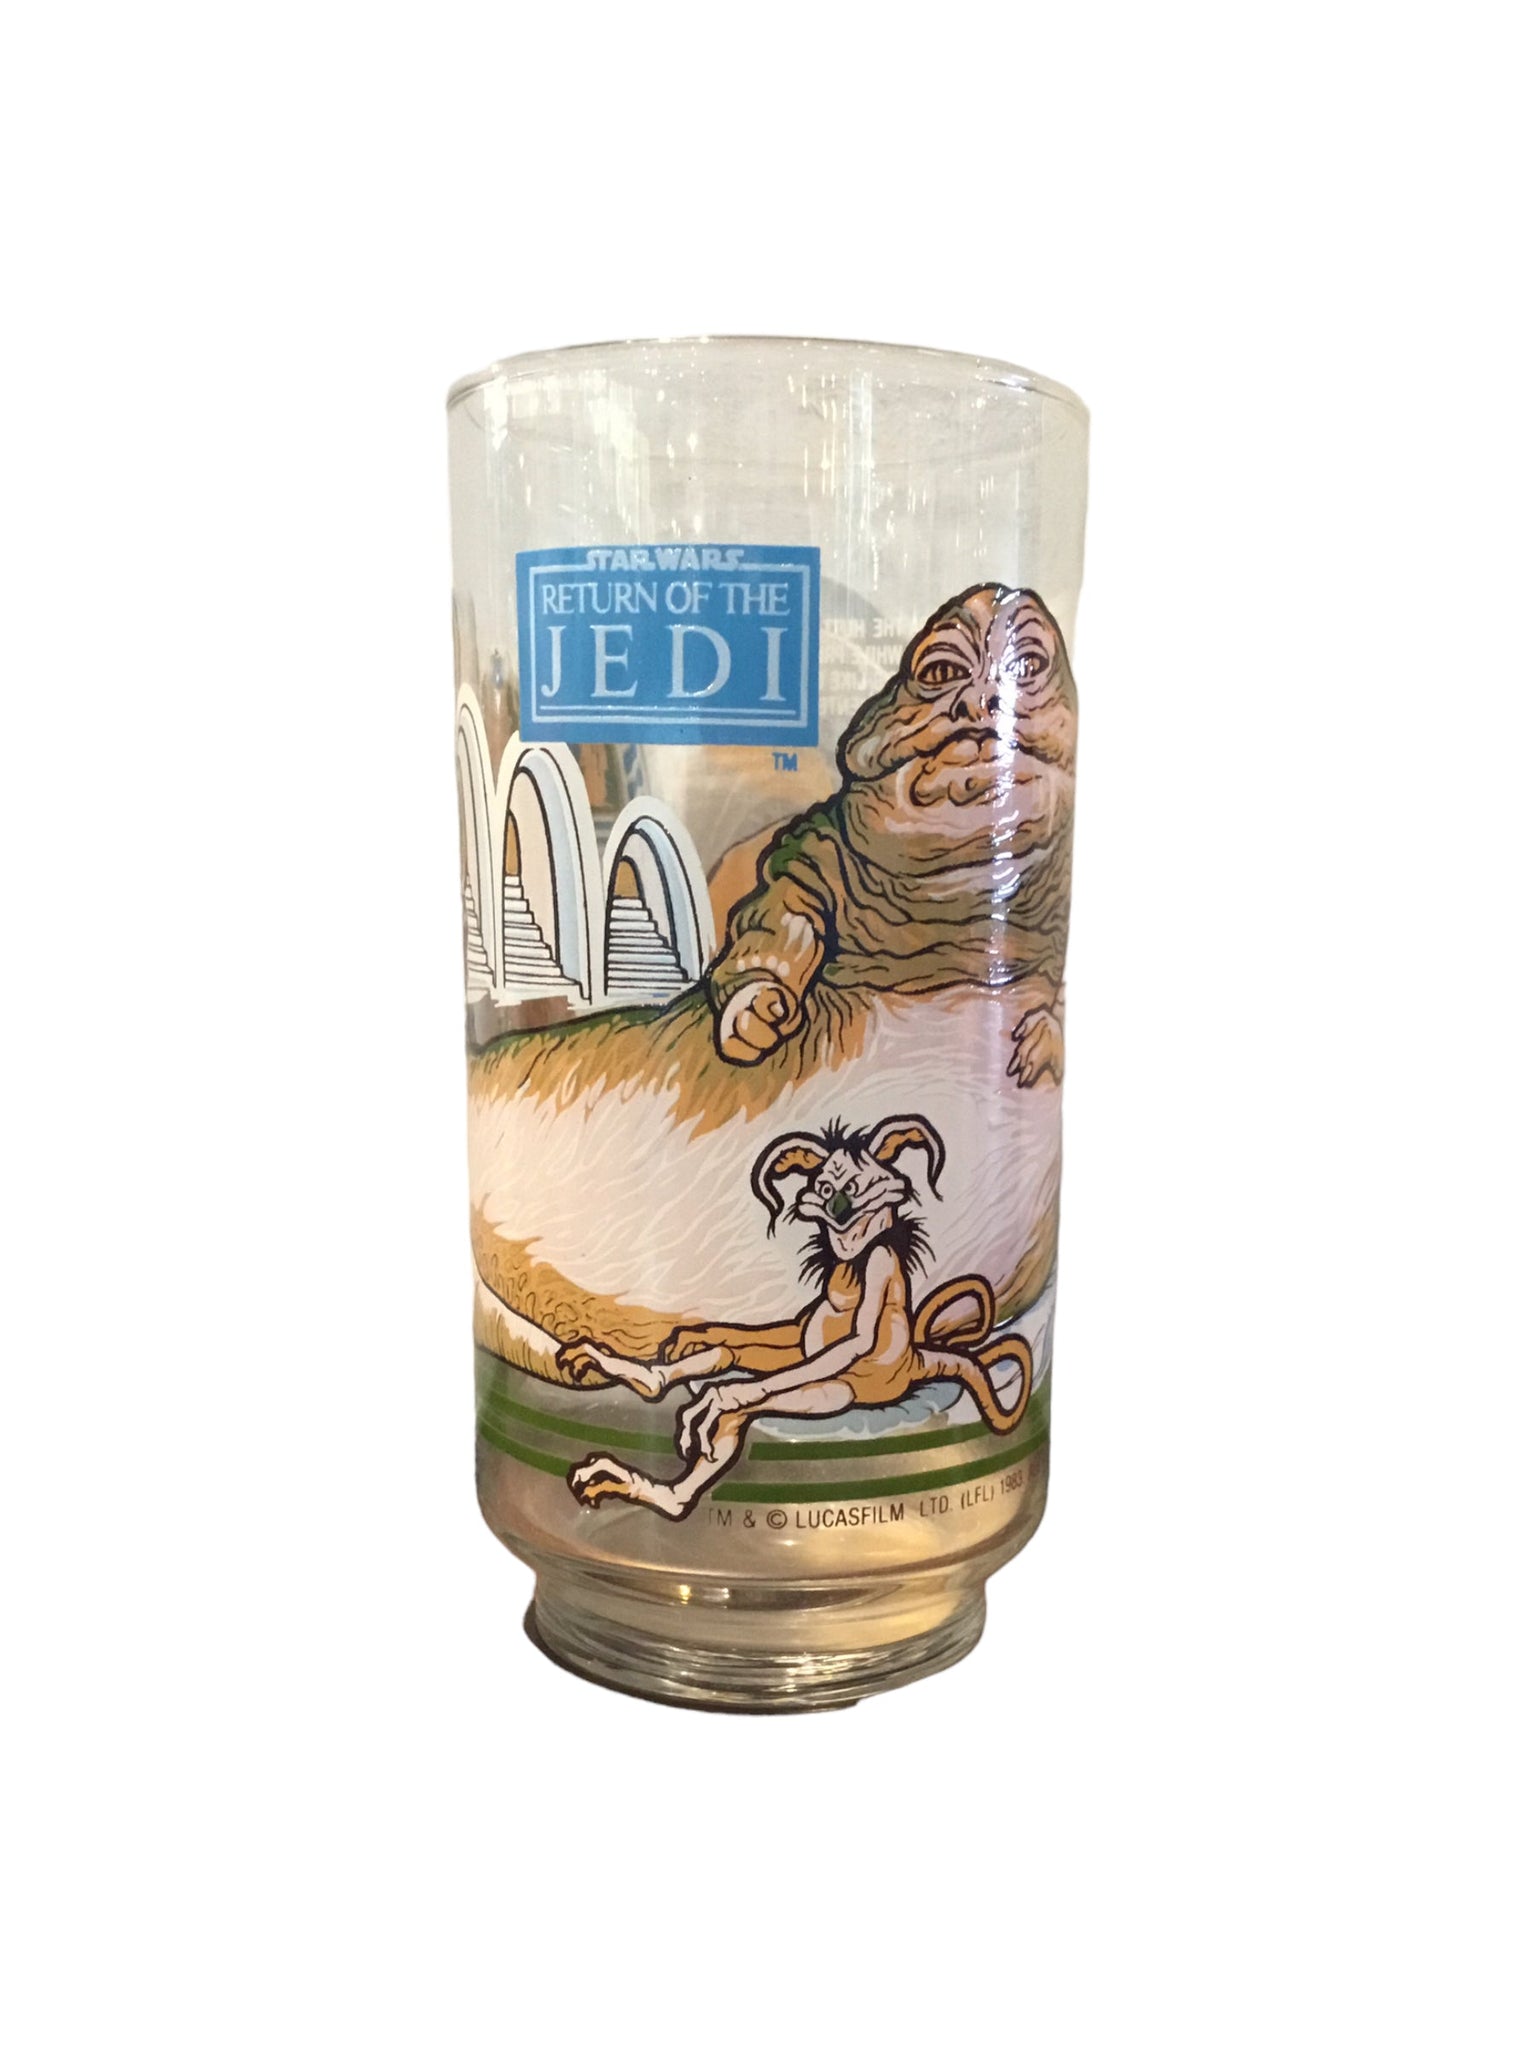 Vintage 1983 Burger King Return Of The Jedi Collectible Drinking Glass set